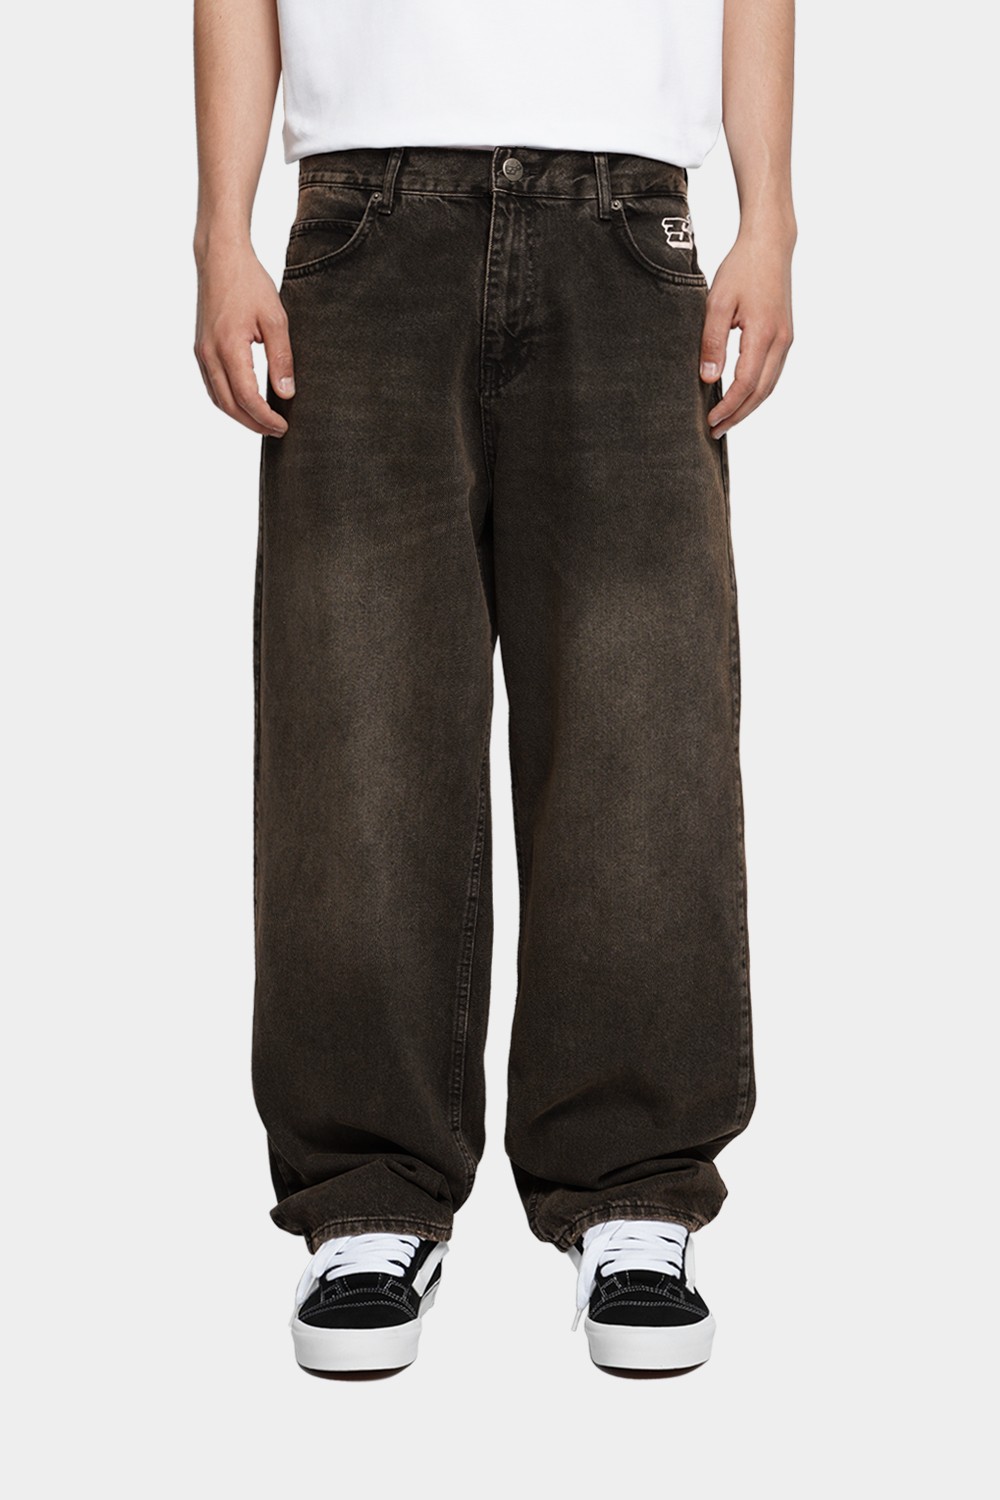 Baggy Skate Jeans - Brown Tint (SHBS-2)